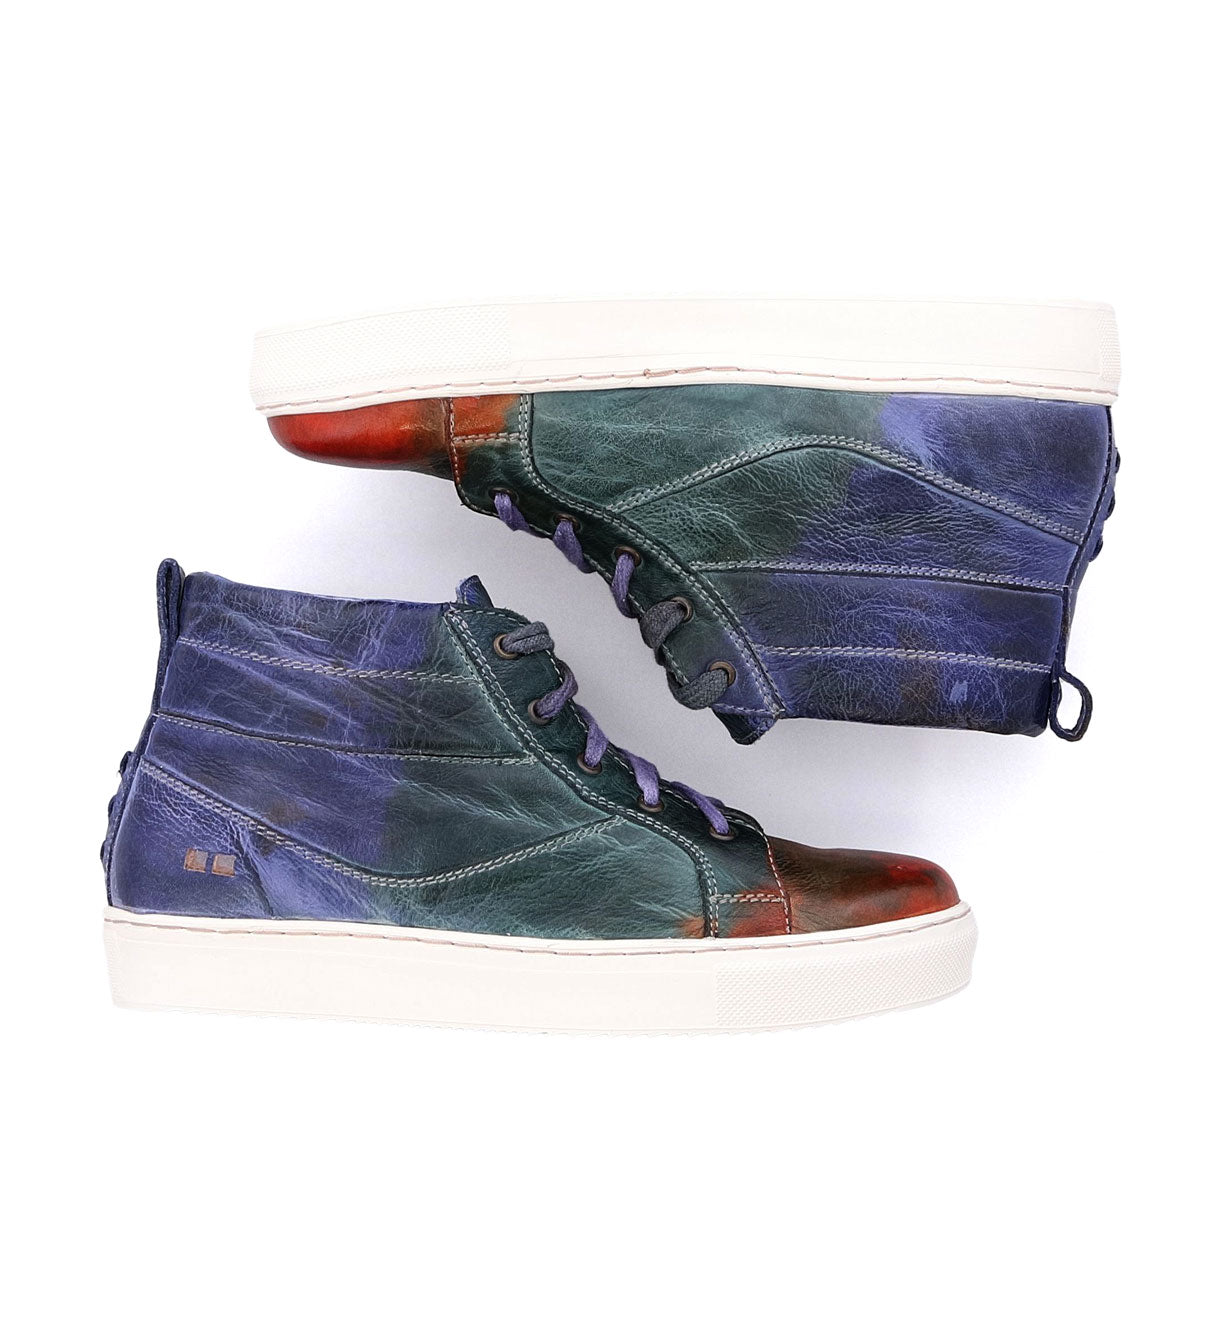 A pair of Rossela high top sneakers with a tie dye pattern by Bed Stu.